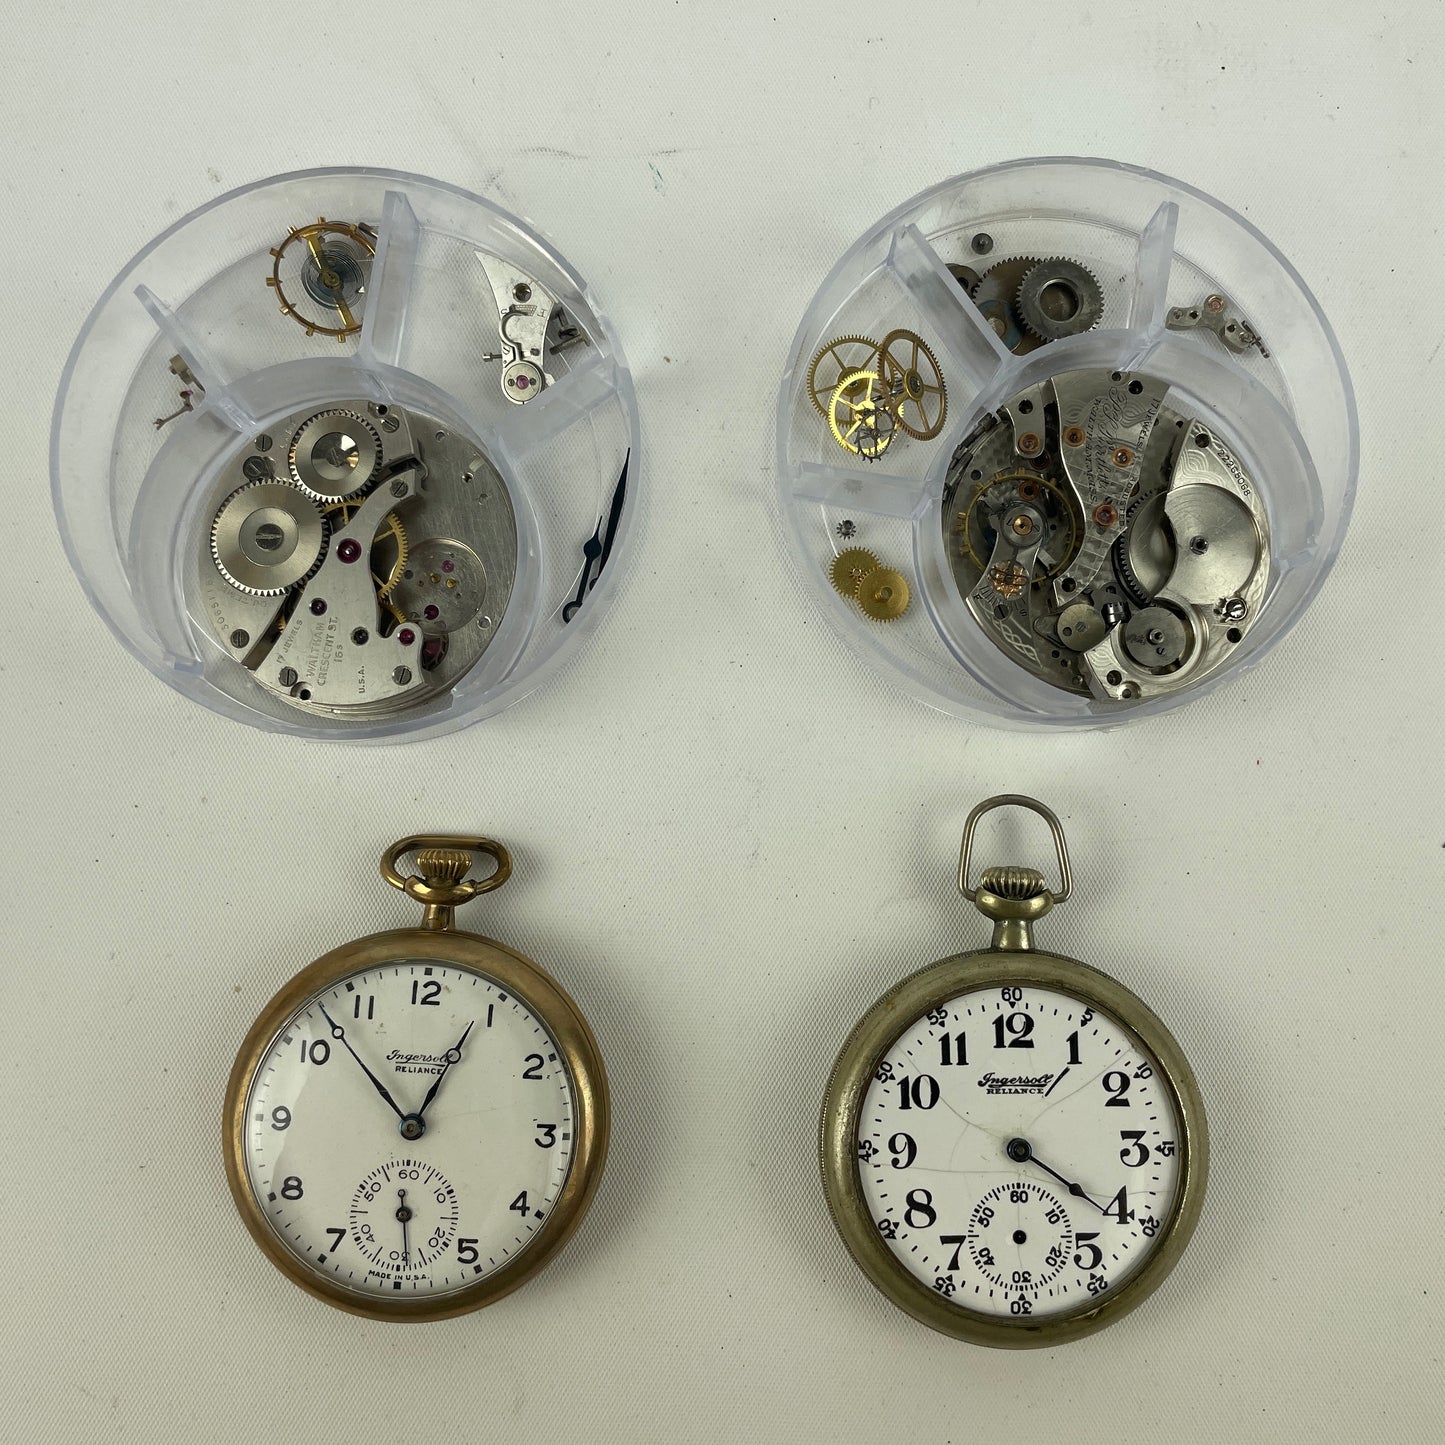 Jan Lot 84- Waltham Pair of 16 Size Pocket Watch Disassembled Movements